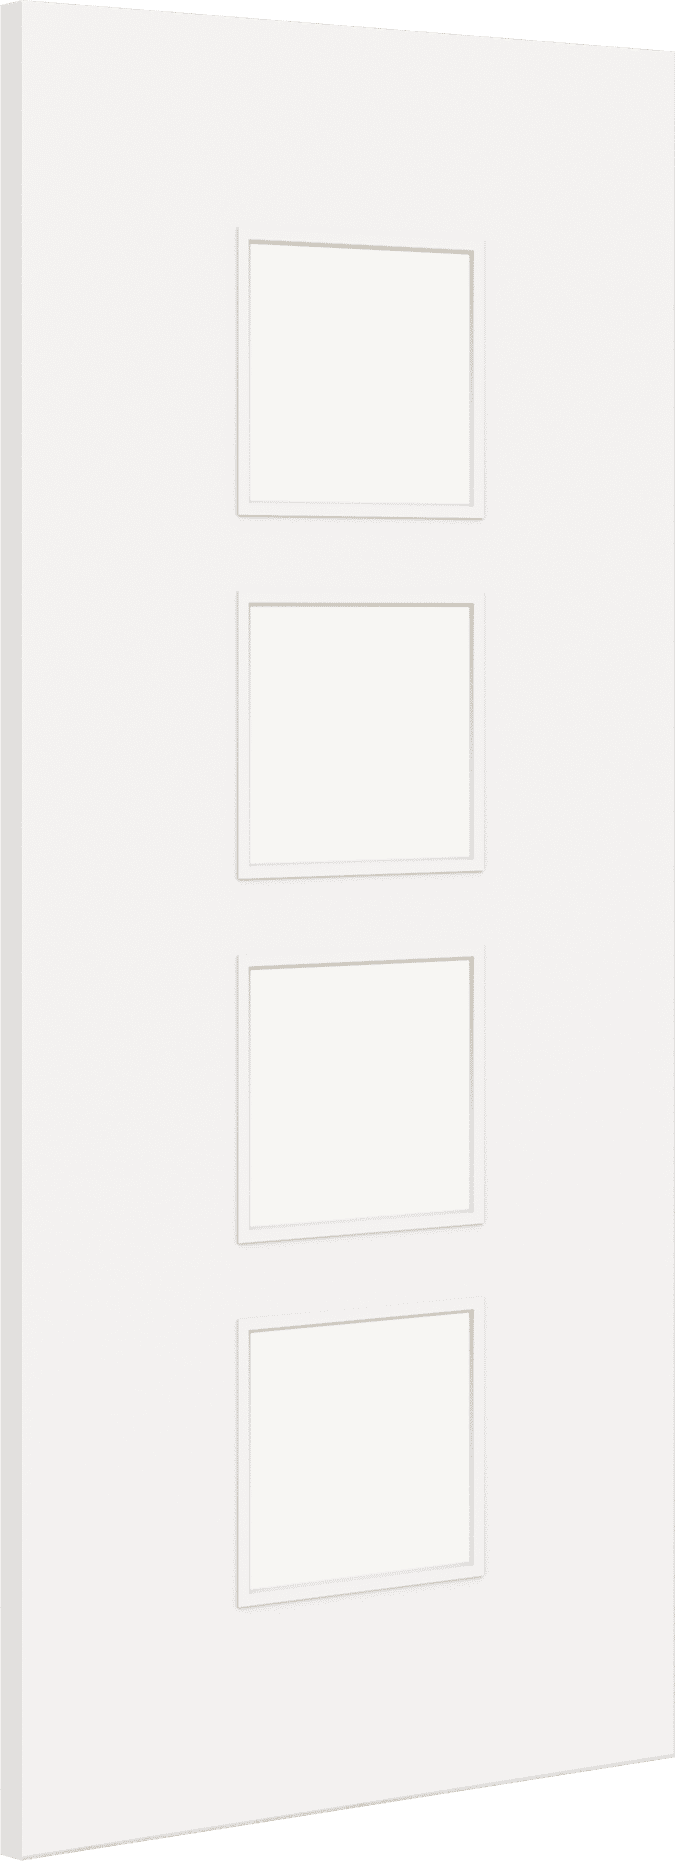 1981mm x 838mm x 44mm (33") Architectural Paint Grade White 09 Clear Glazed Fire Door Blank